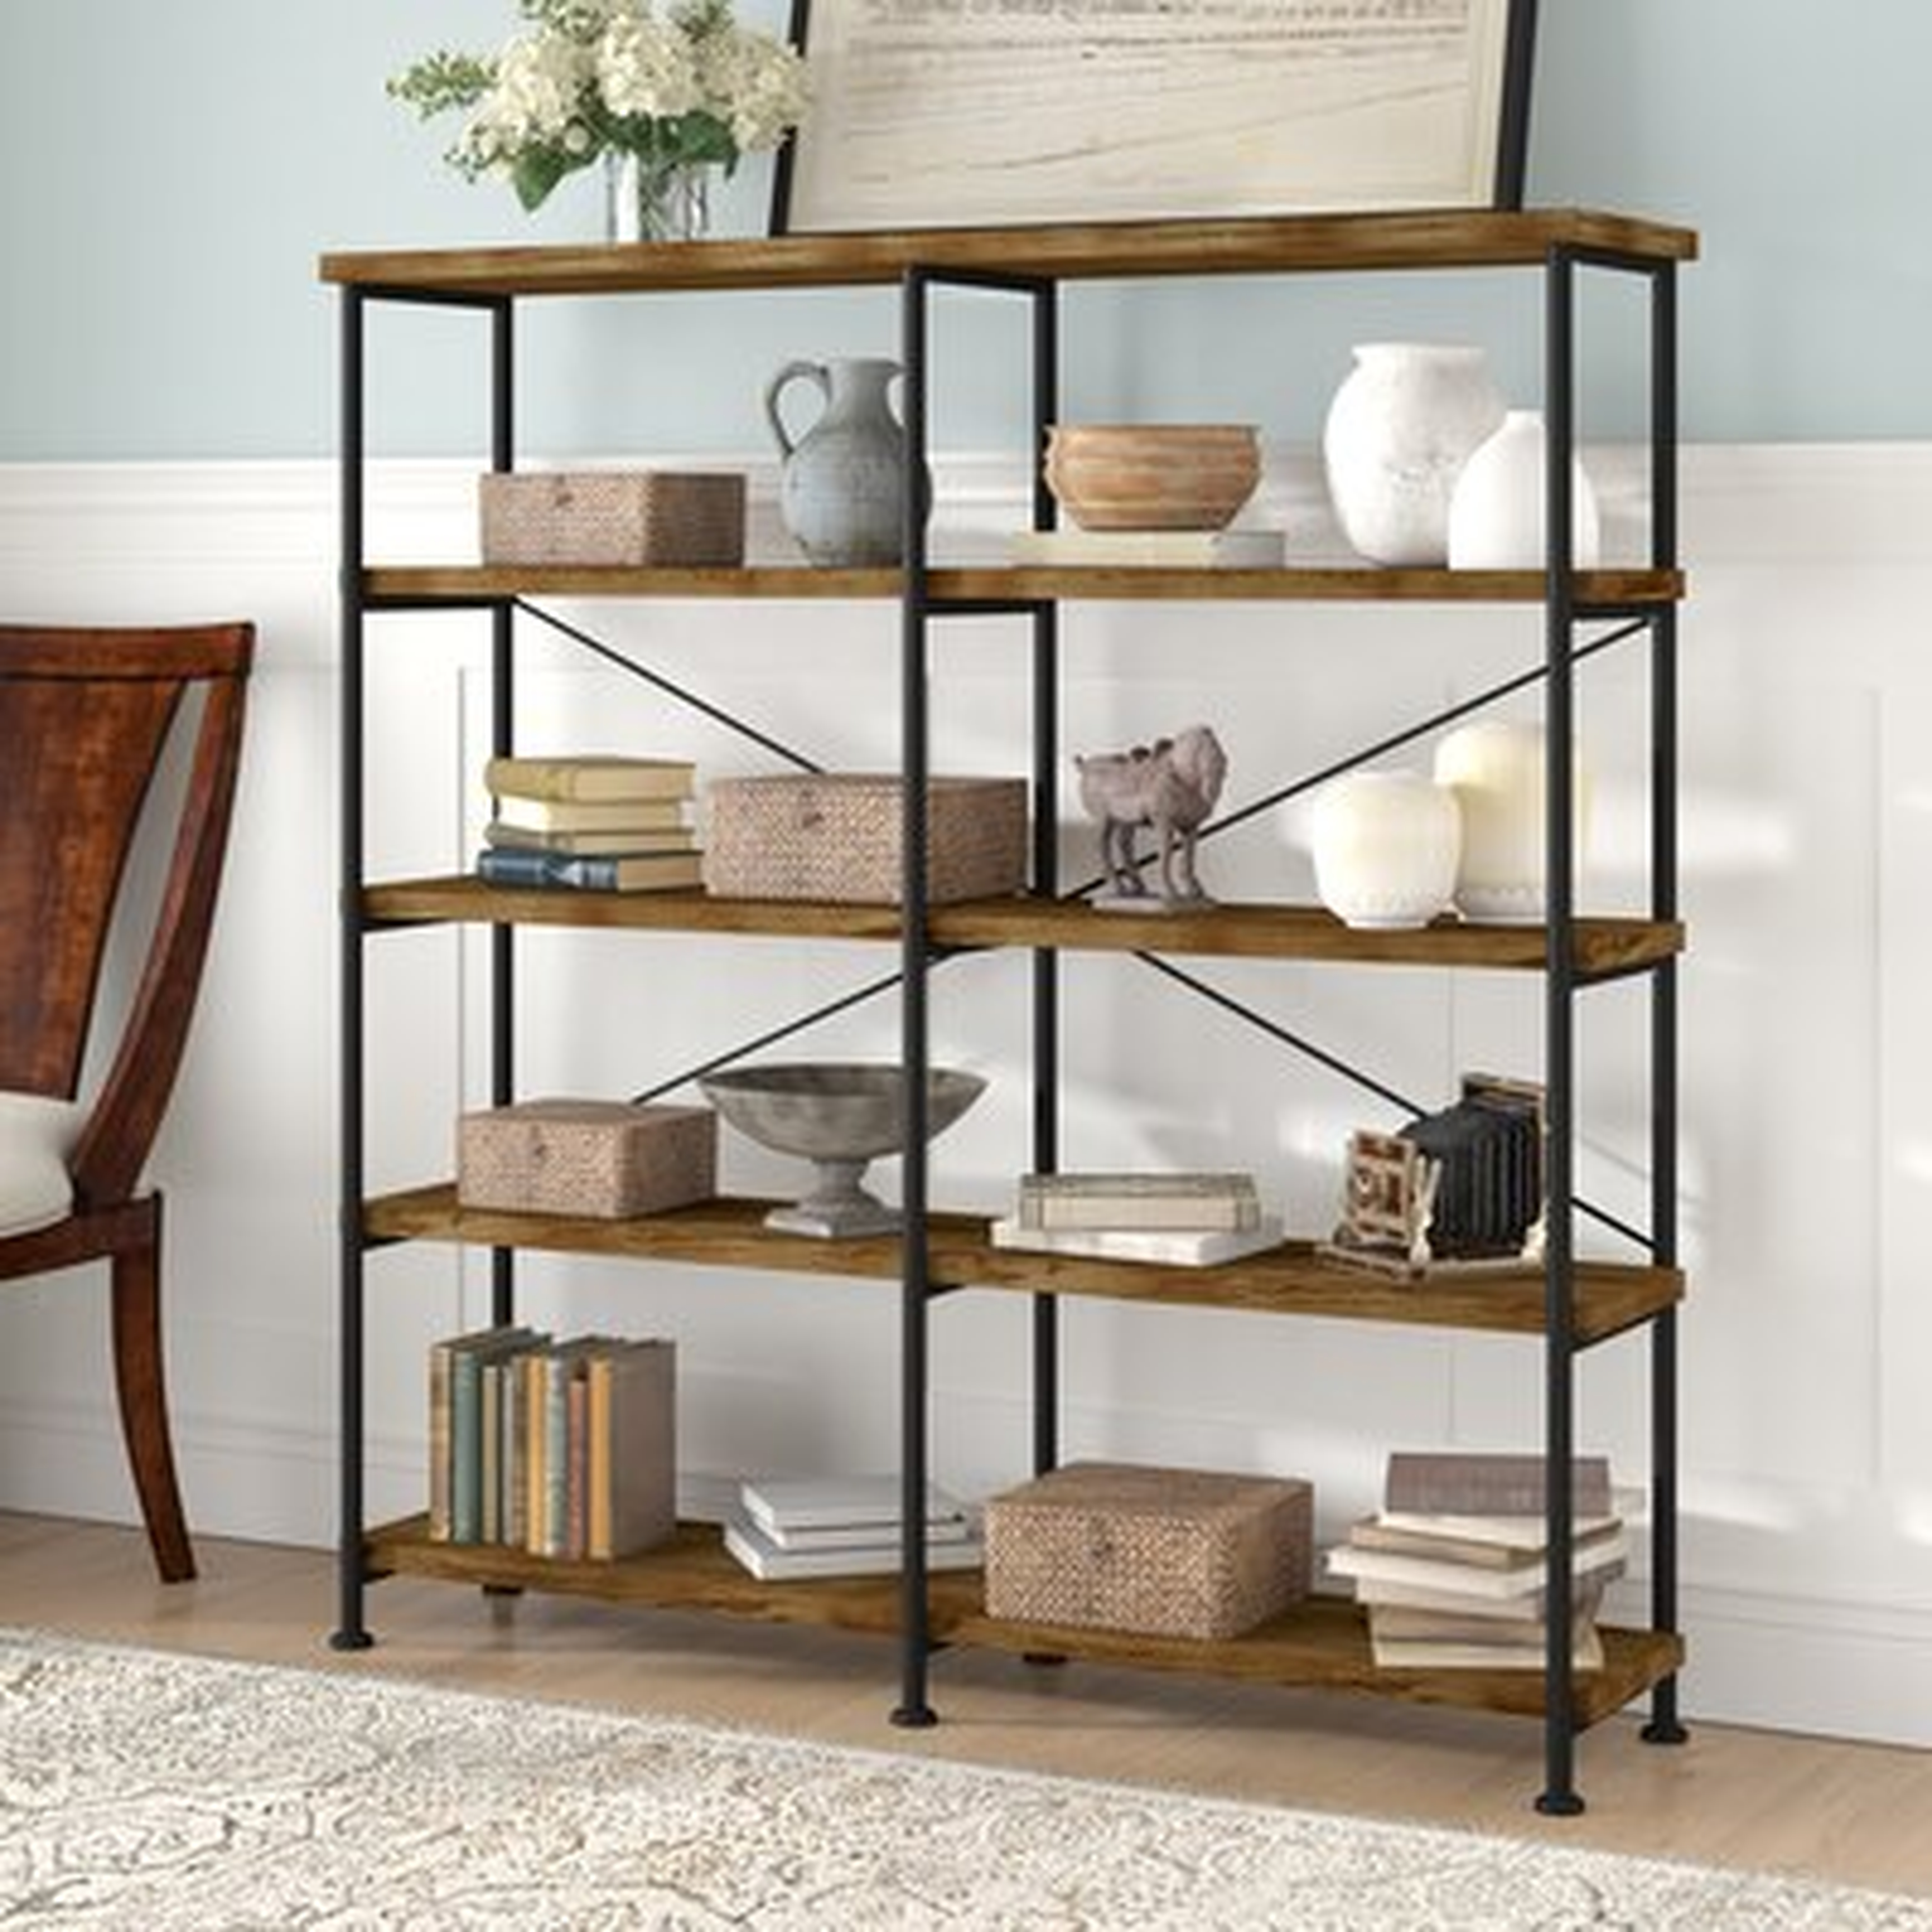 Cifuentes 63" H x 60" W Metal Library Bookcase - Wayfair